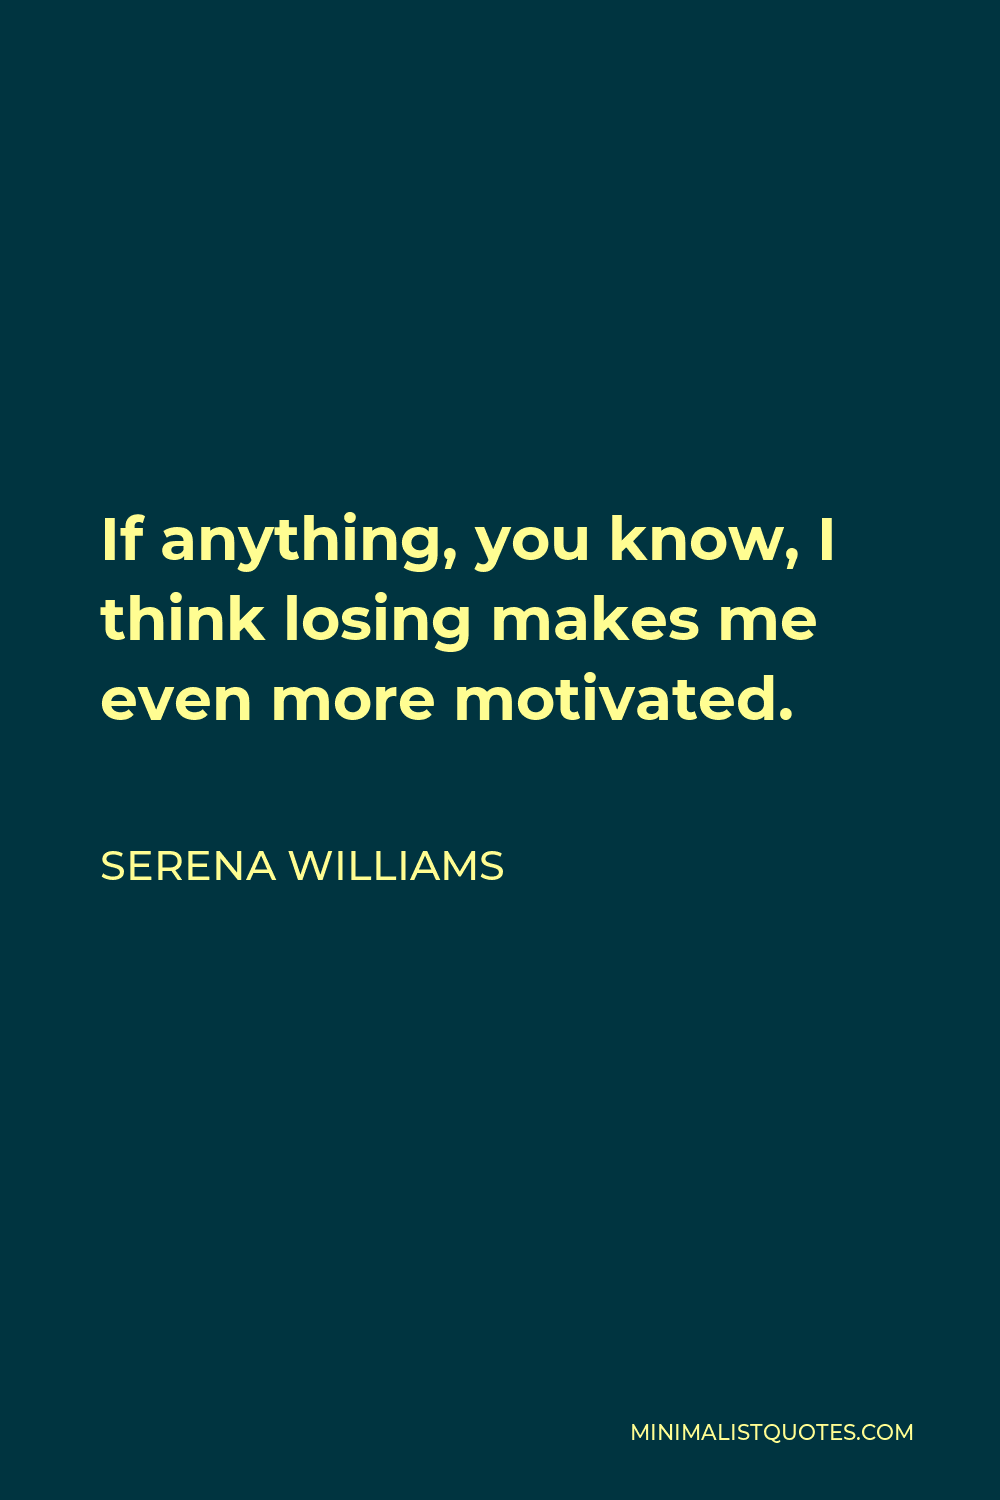 Serena Williams Quote - If anything, you know, I think losing makes me even more motivated.